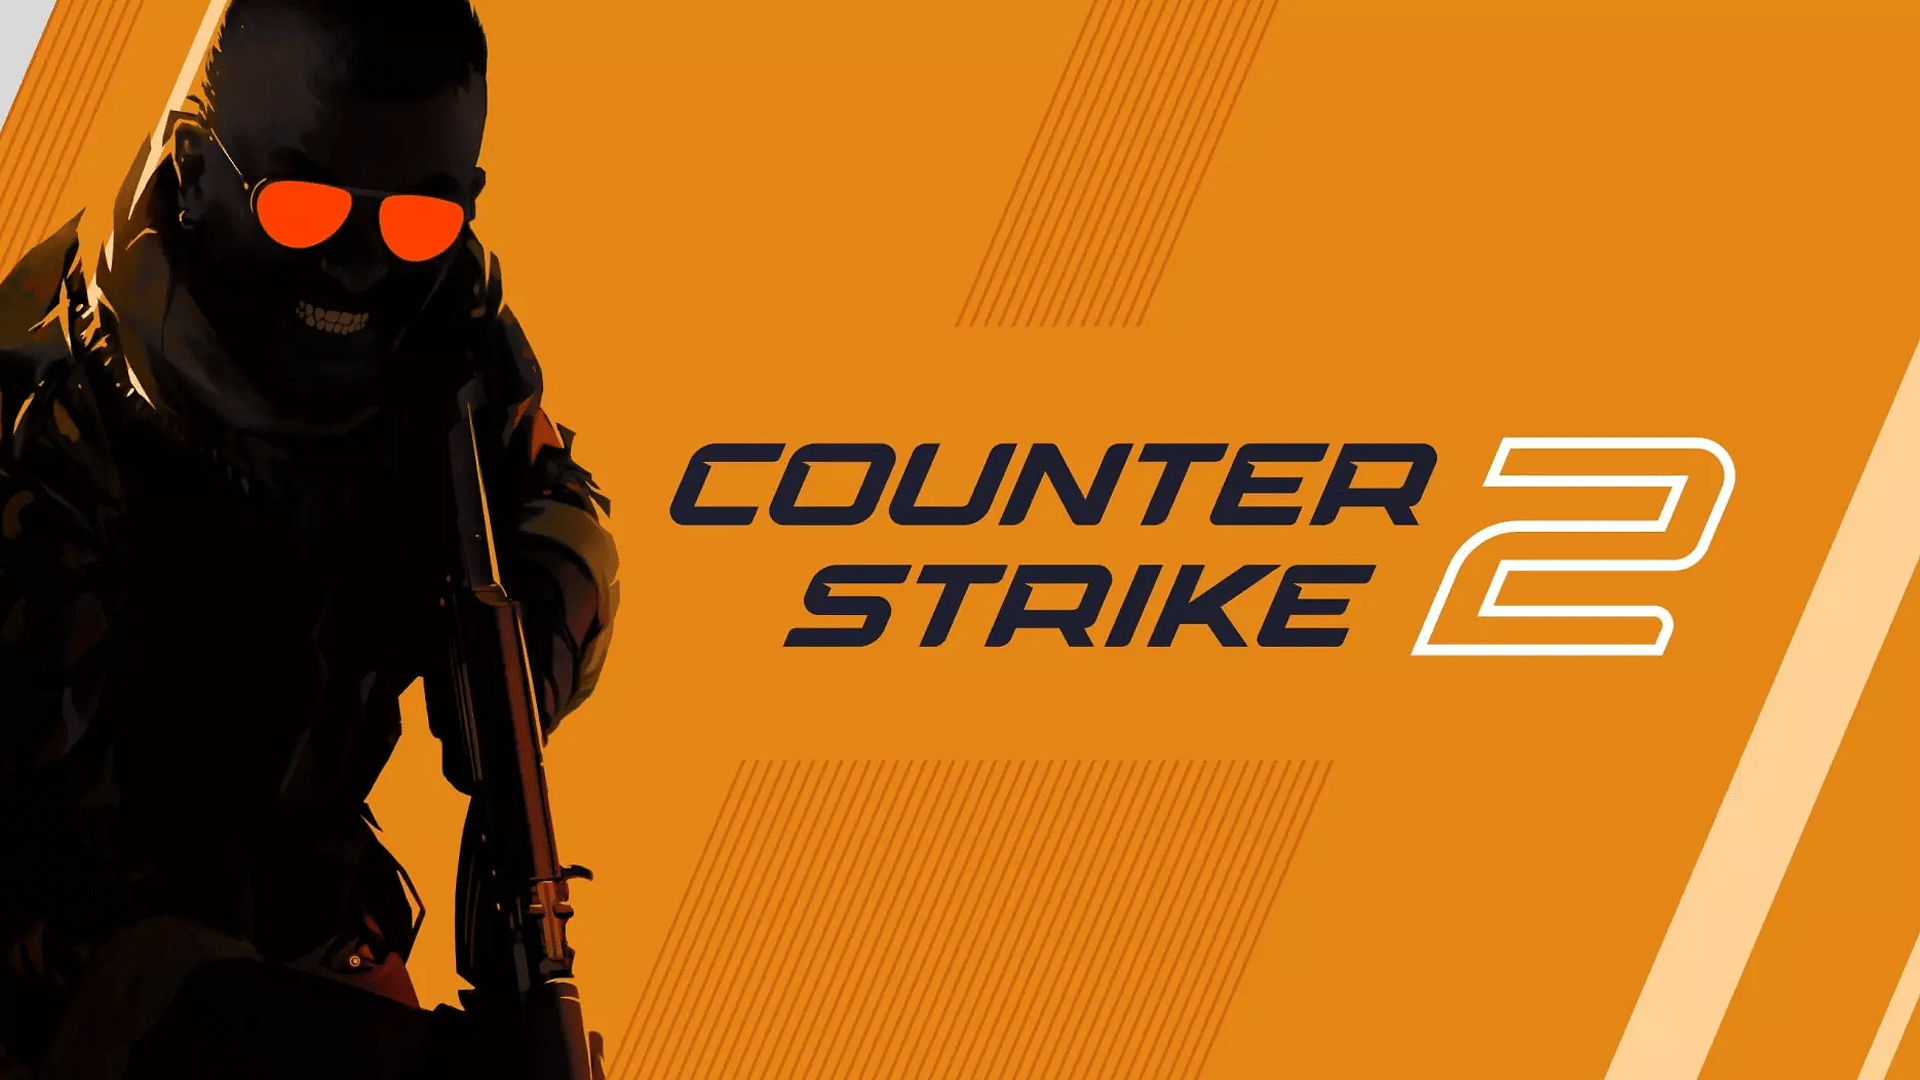 An image showing Counter-Strike 2 cover with terrorist